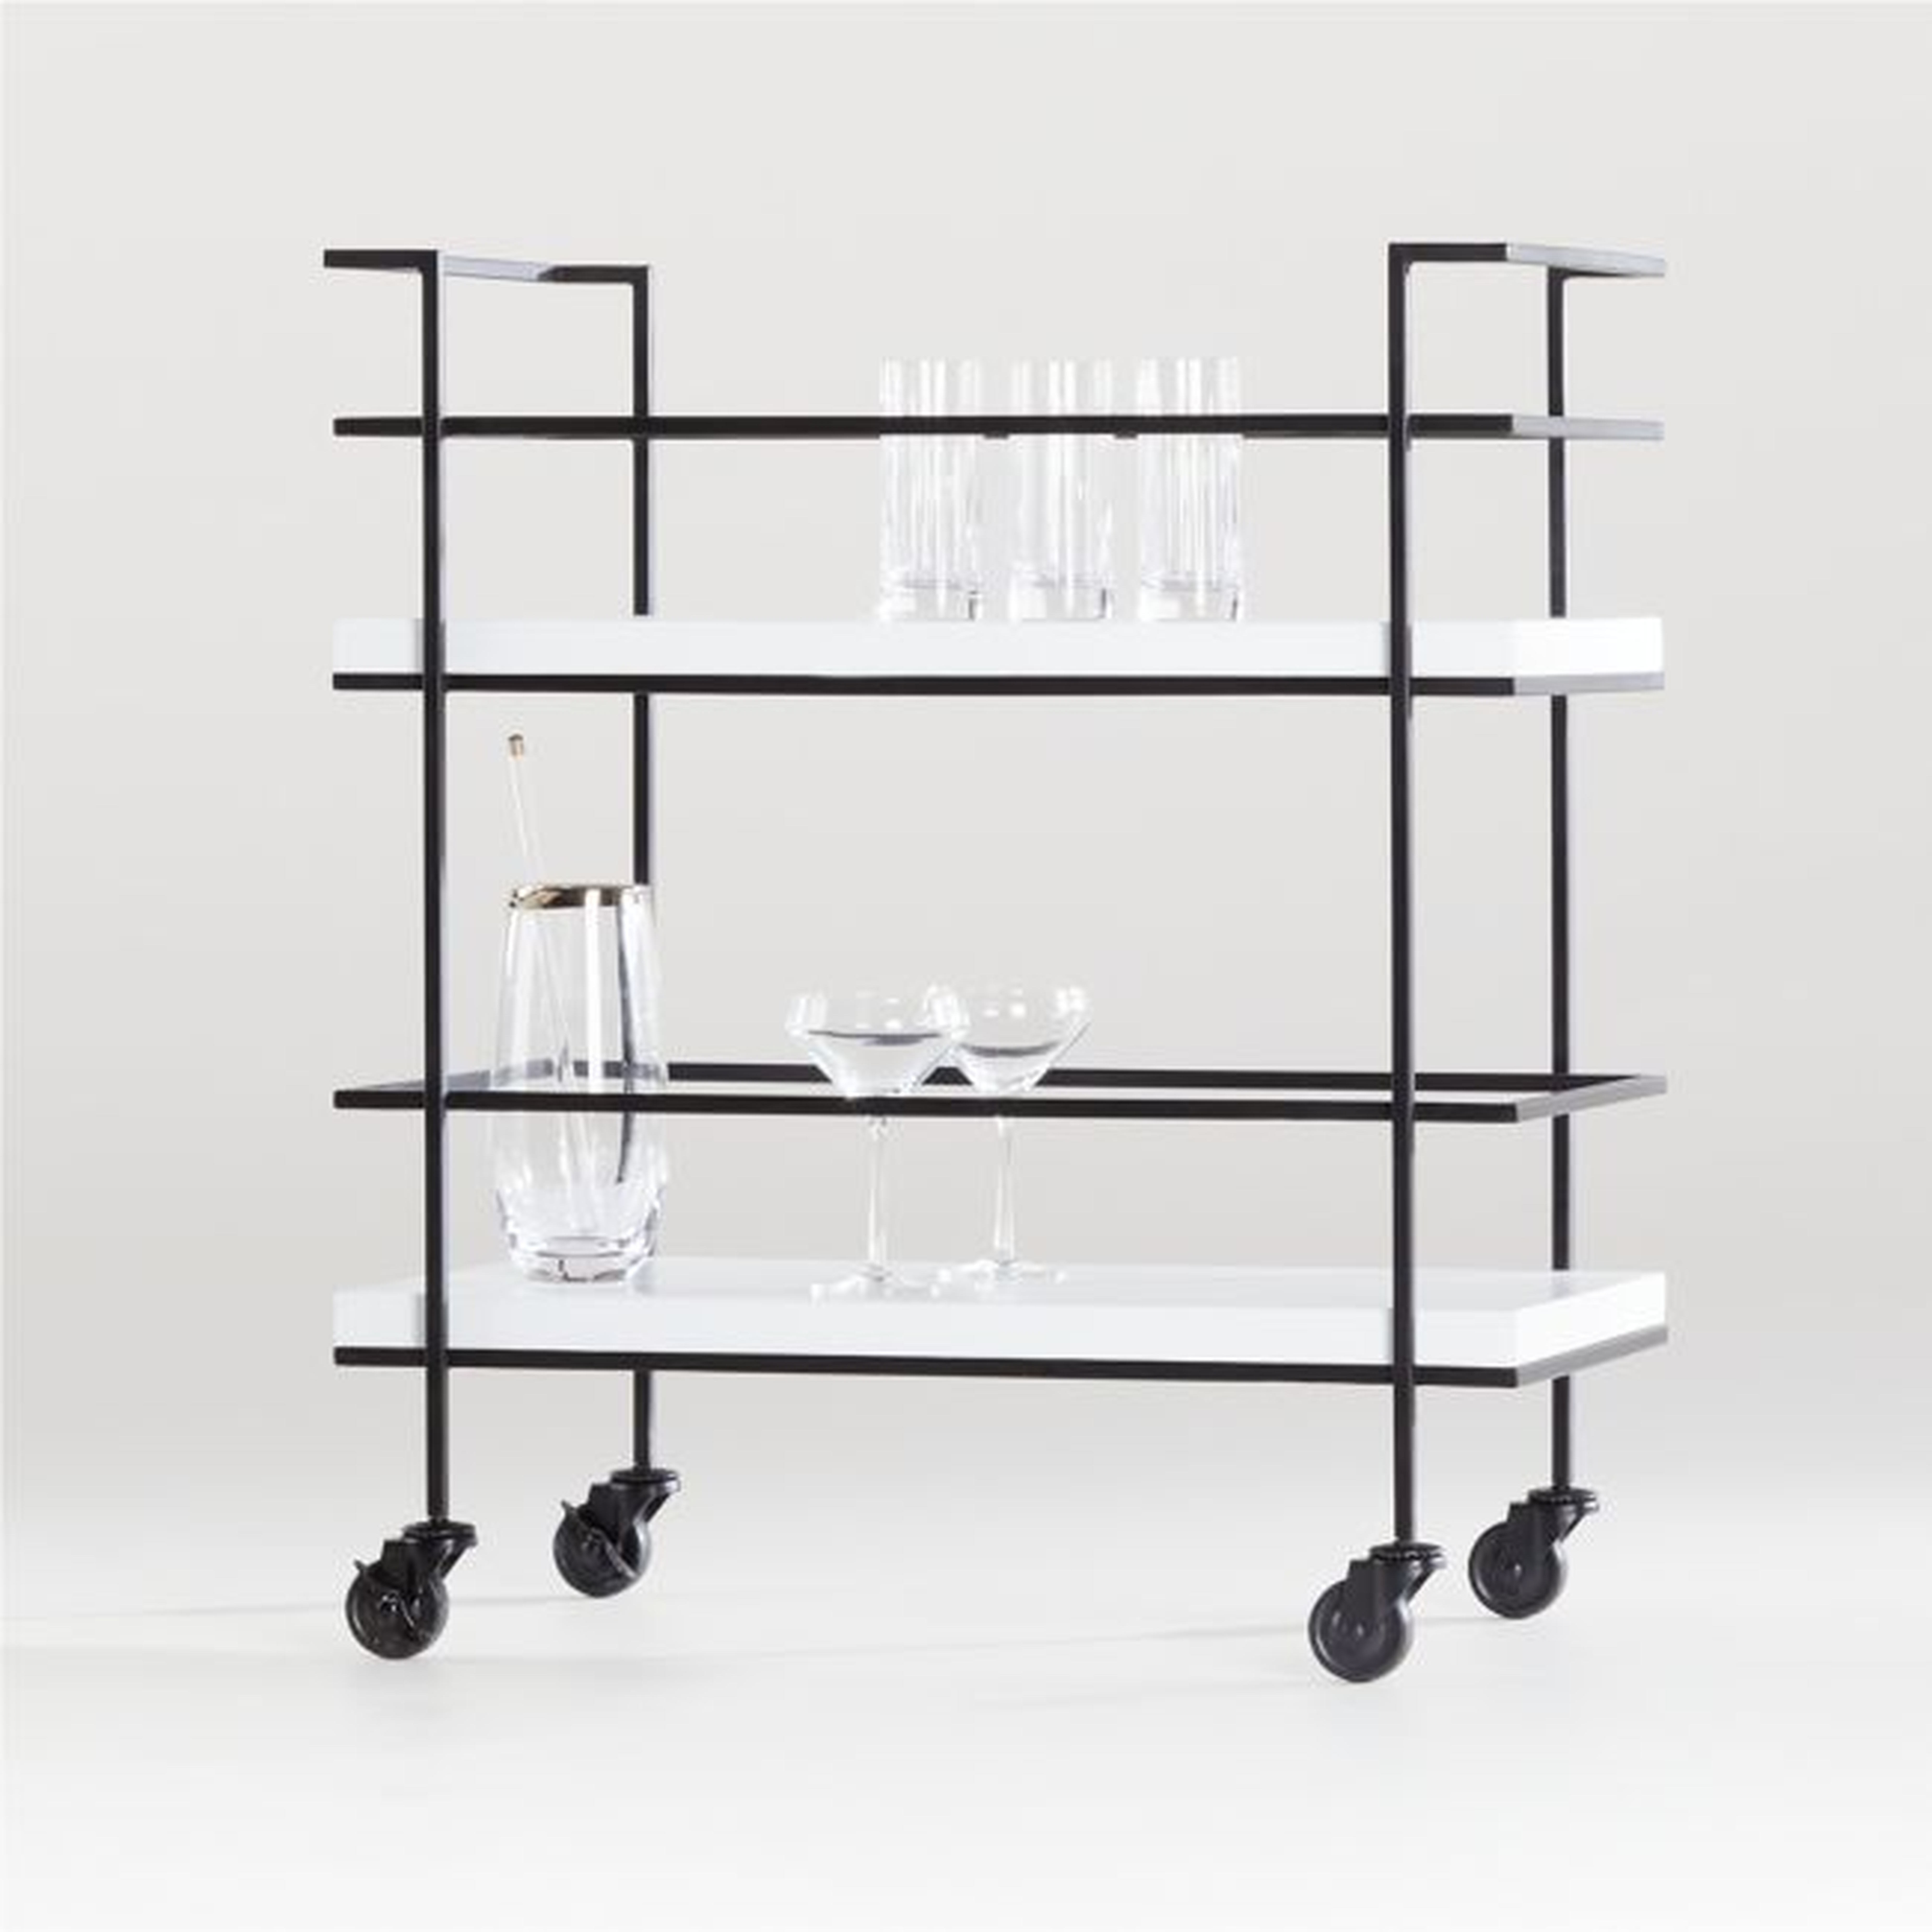 Adina Black Cart with White Concrete Shelves - Crate and Barrel